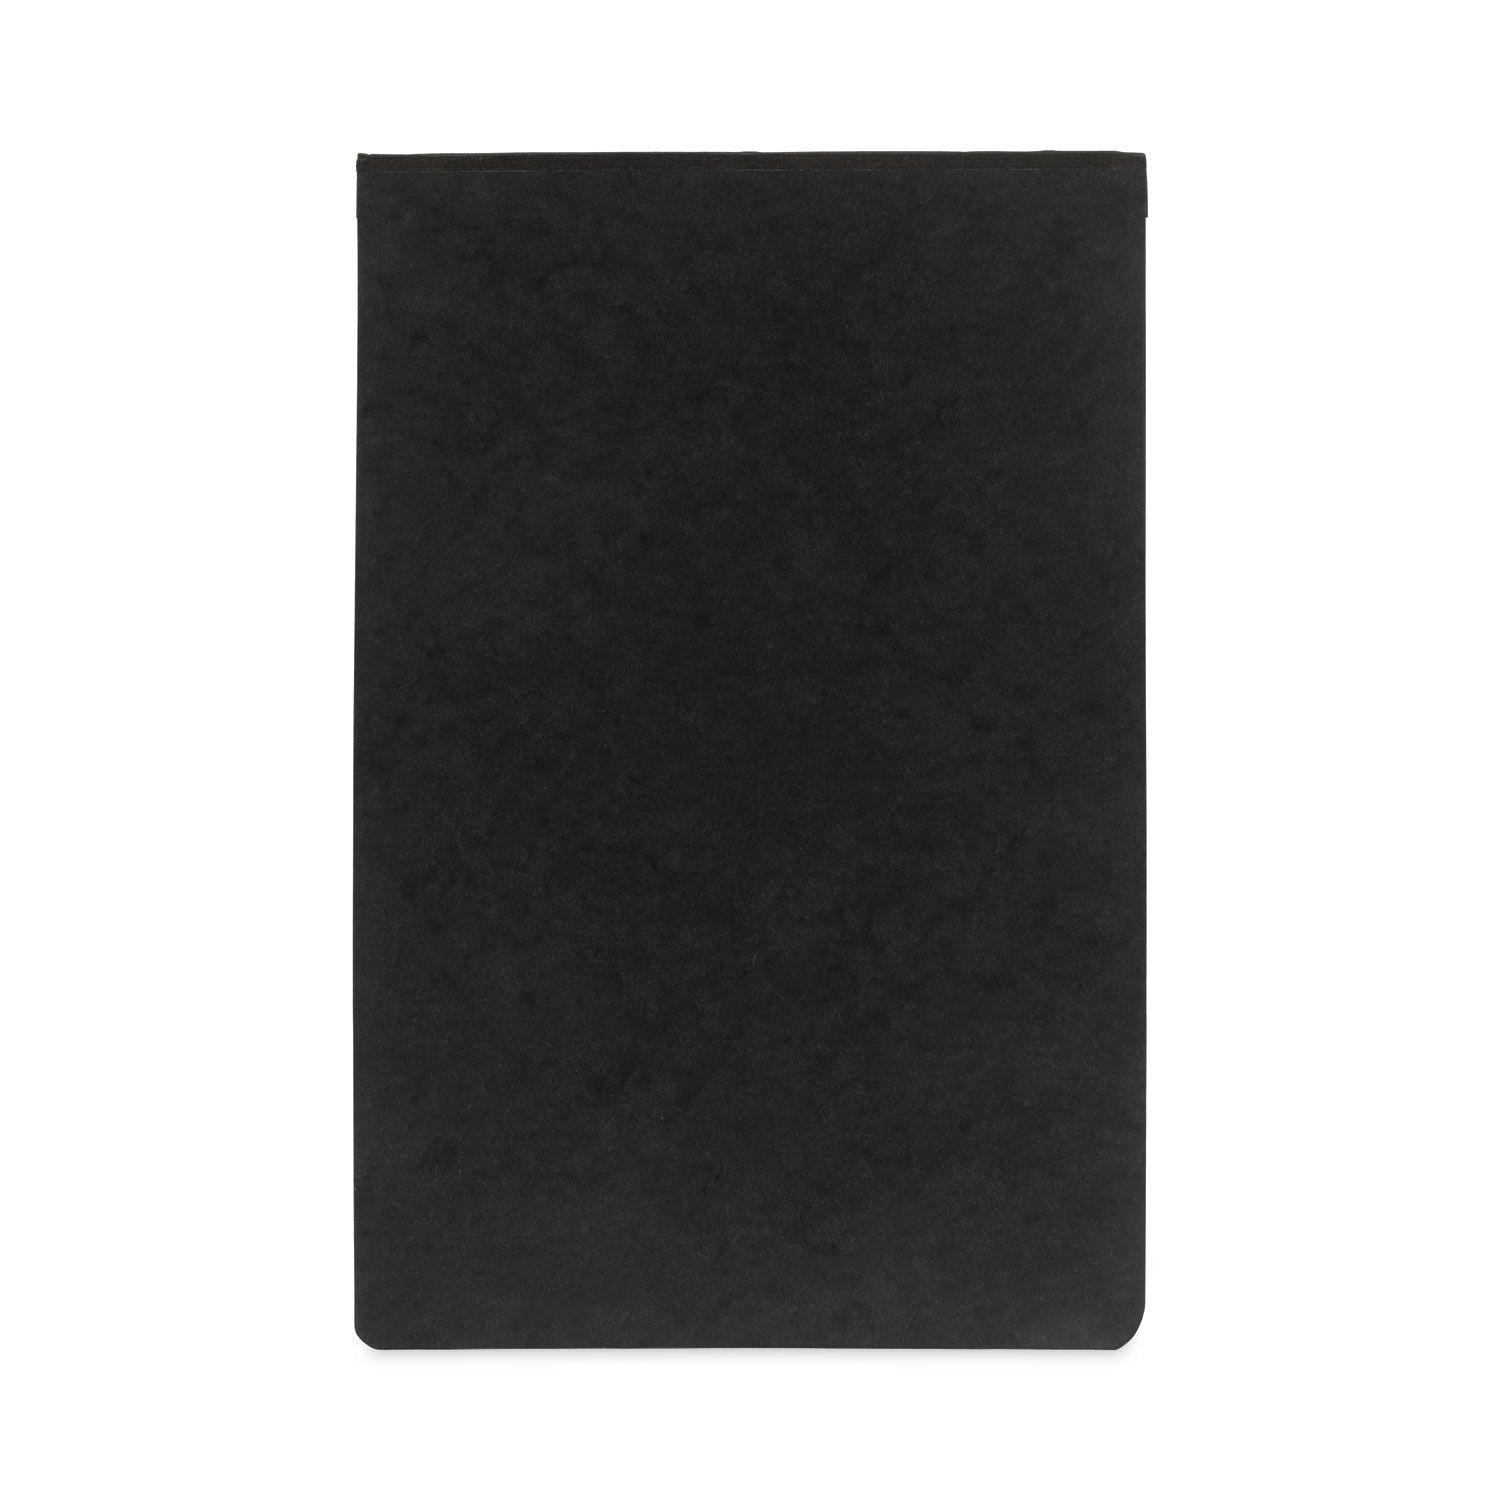 Pressboard Report Cover with Tyvek Reinforced Hinge by ACCO ACC47071